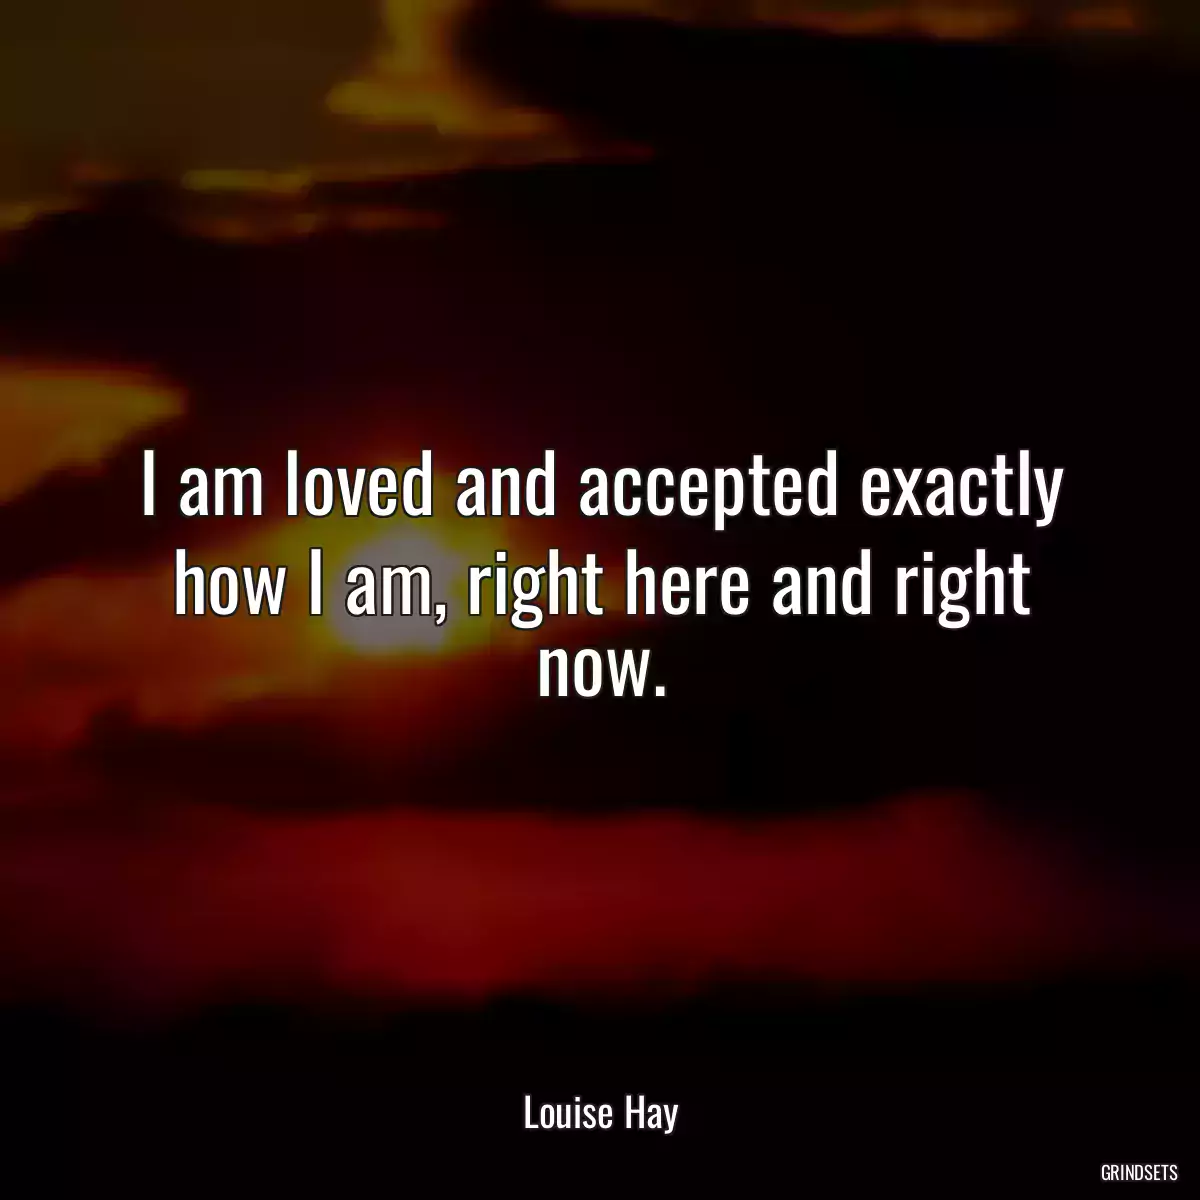 I am loved and accepted exactly how I am, right here and right now.